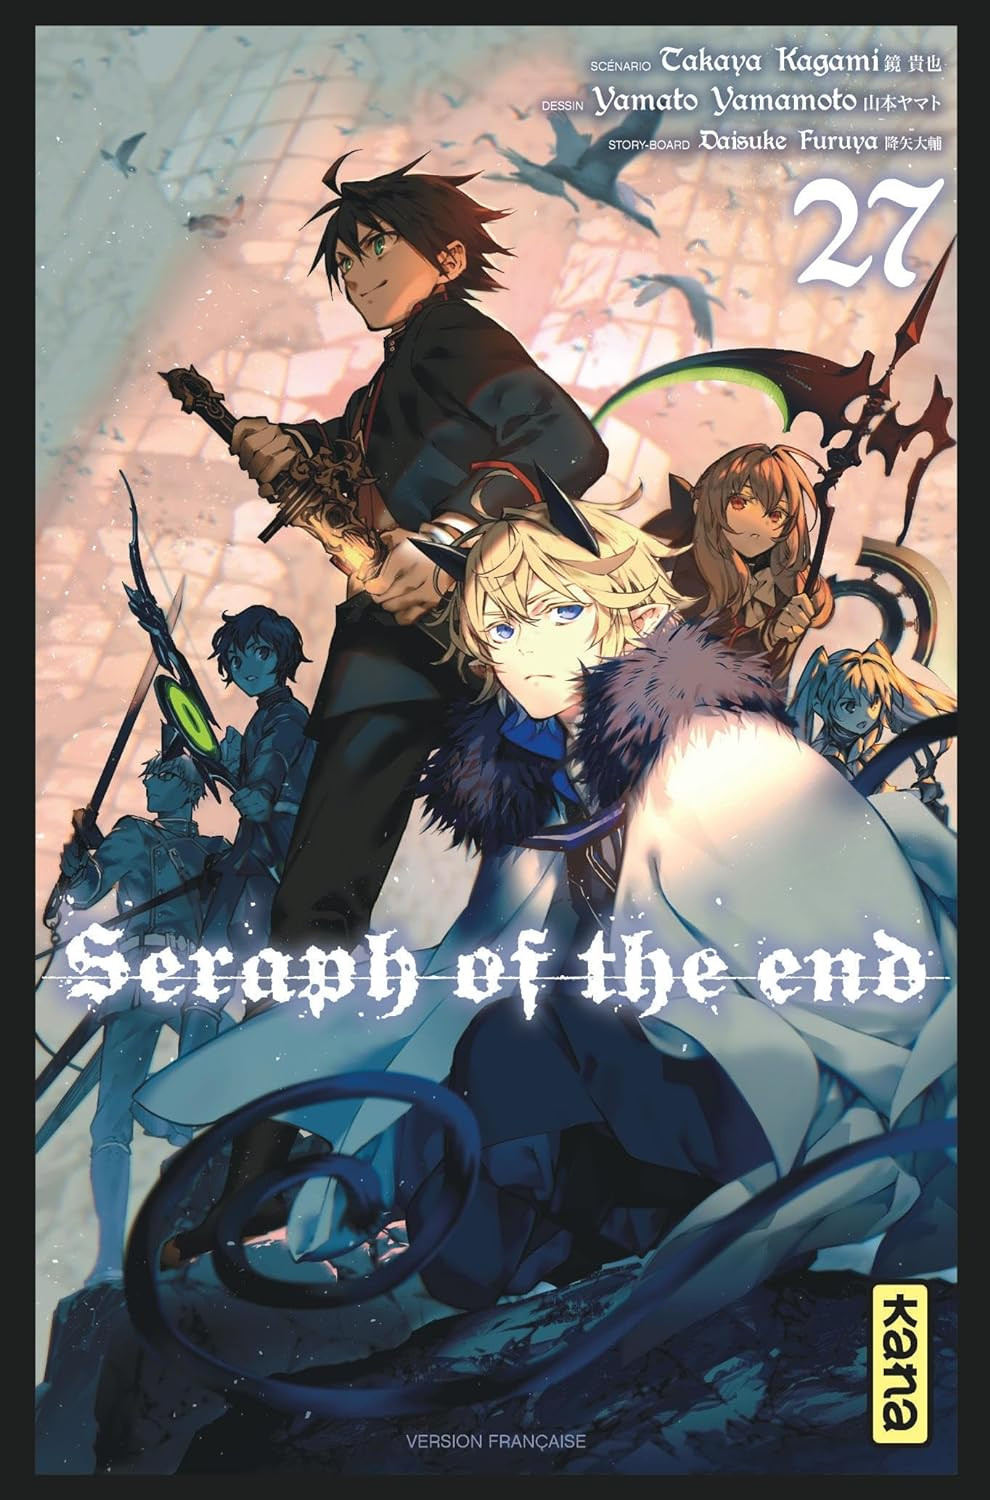 Seraph of the End Vol.27